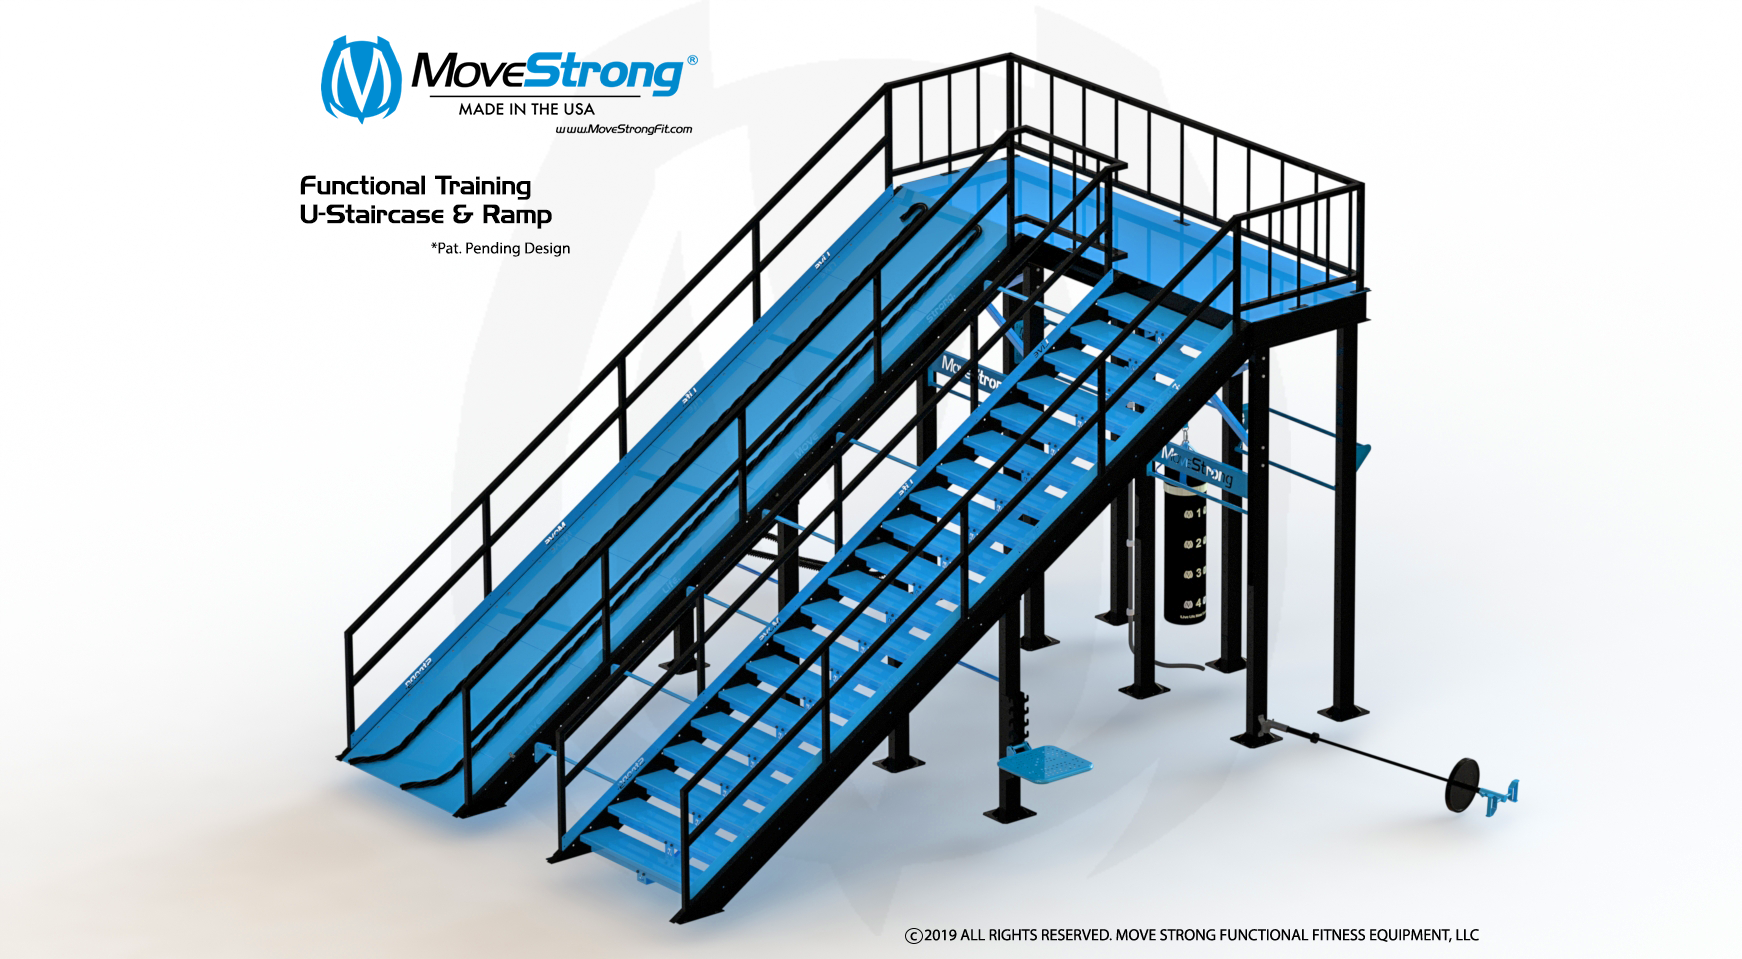 Functional Training U-Staircase and Ramp